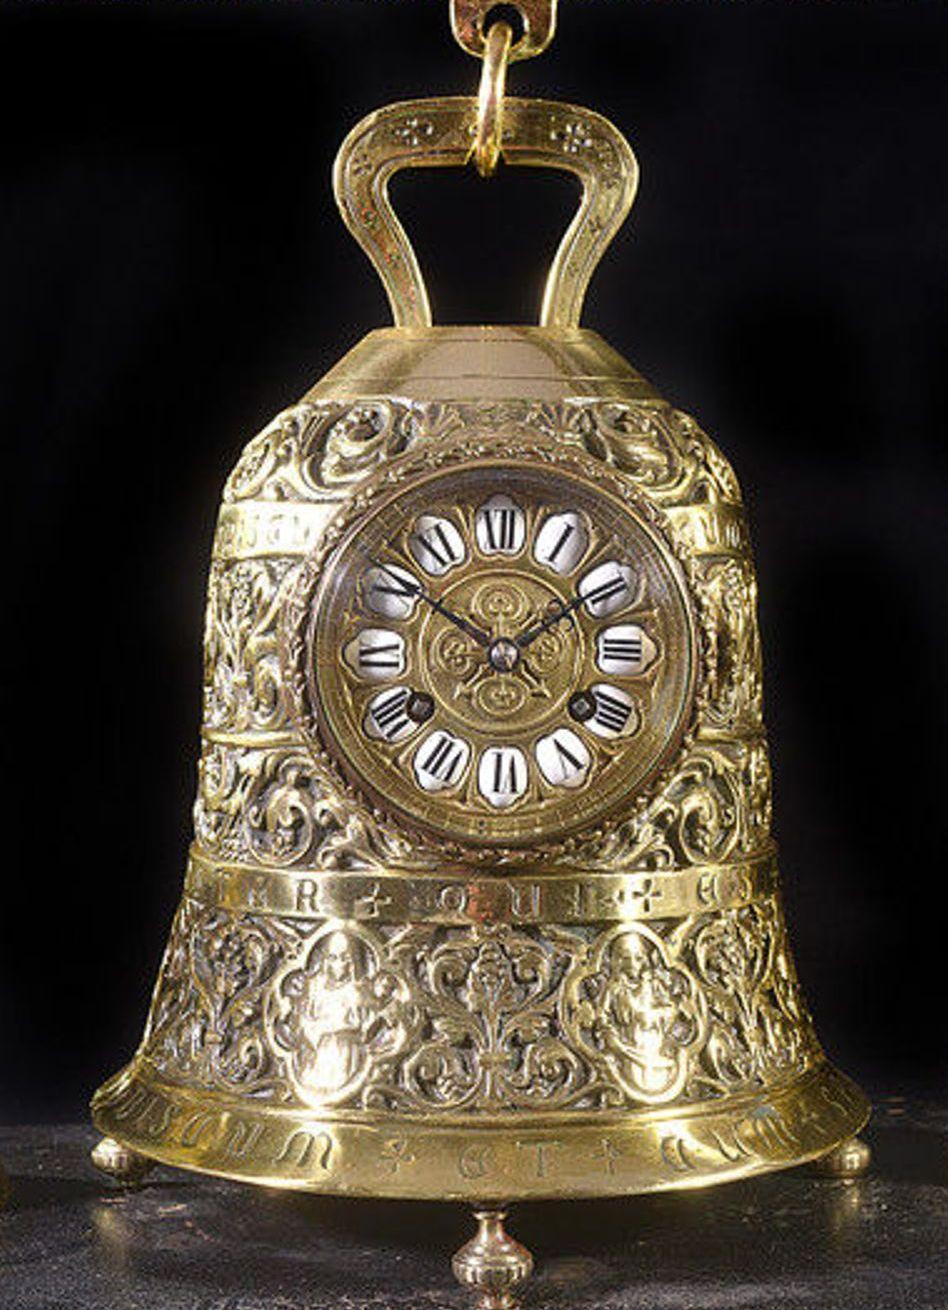 An unusual French late 19th century brass bell clock on its original stand.
The brass dial and chapter ring with enamel Roman numerals and winders for the eight day movement and chime.
This rare clock is inscribed 